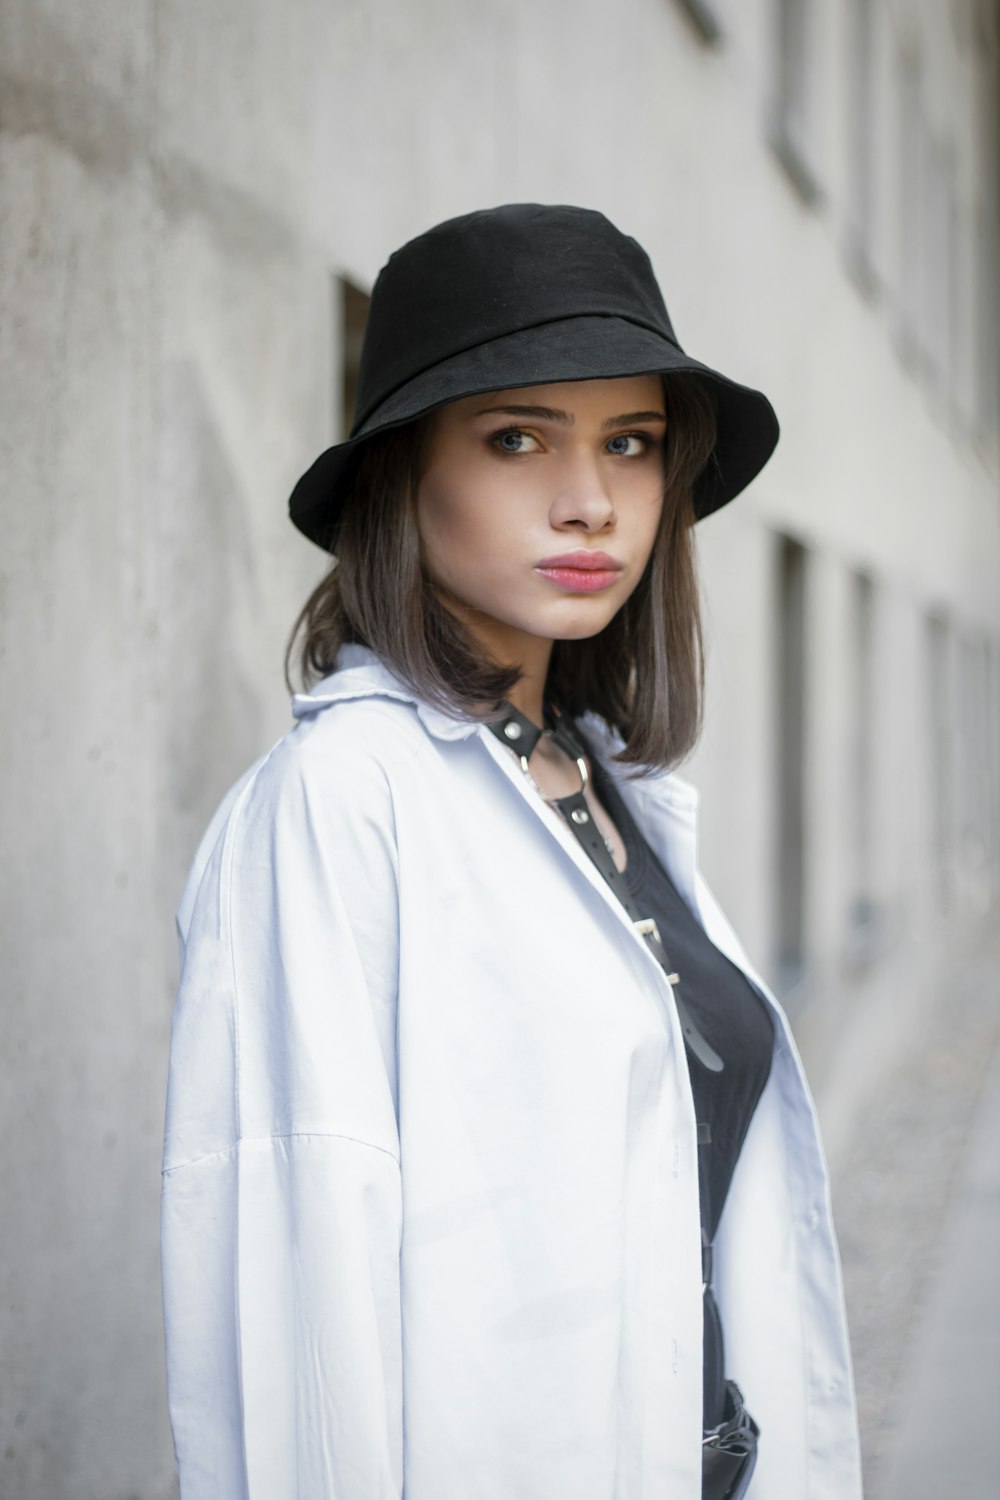 a woman wearing a white coat and a black hat